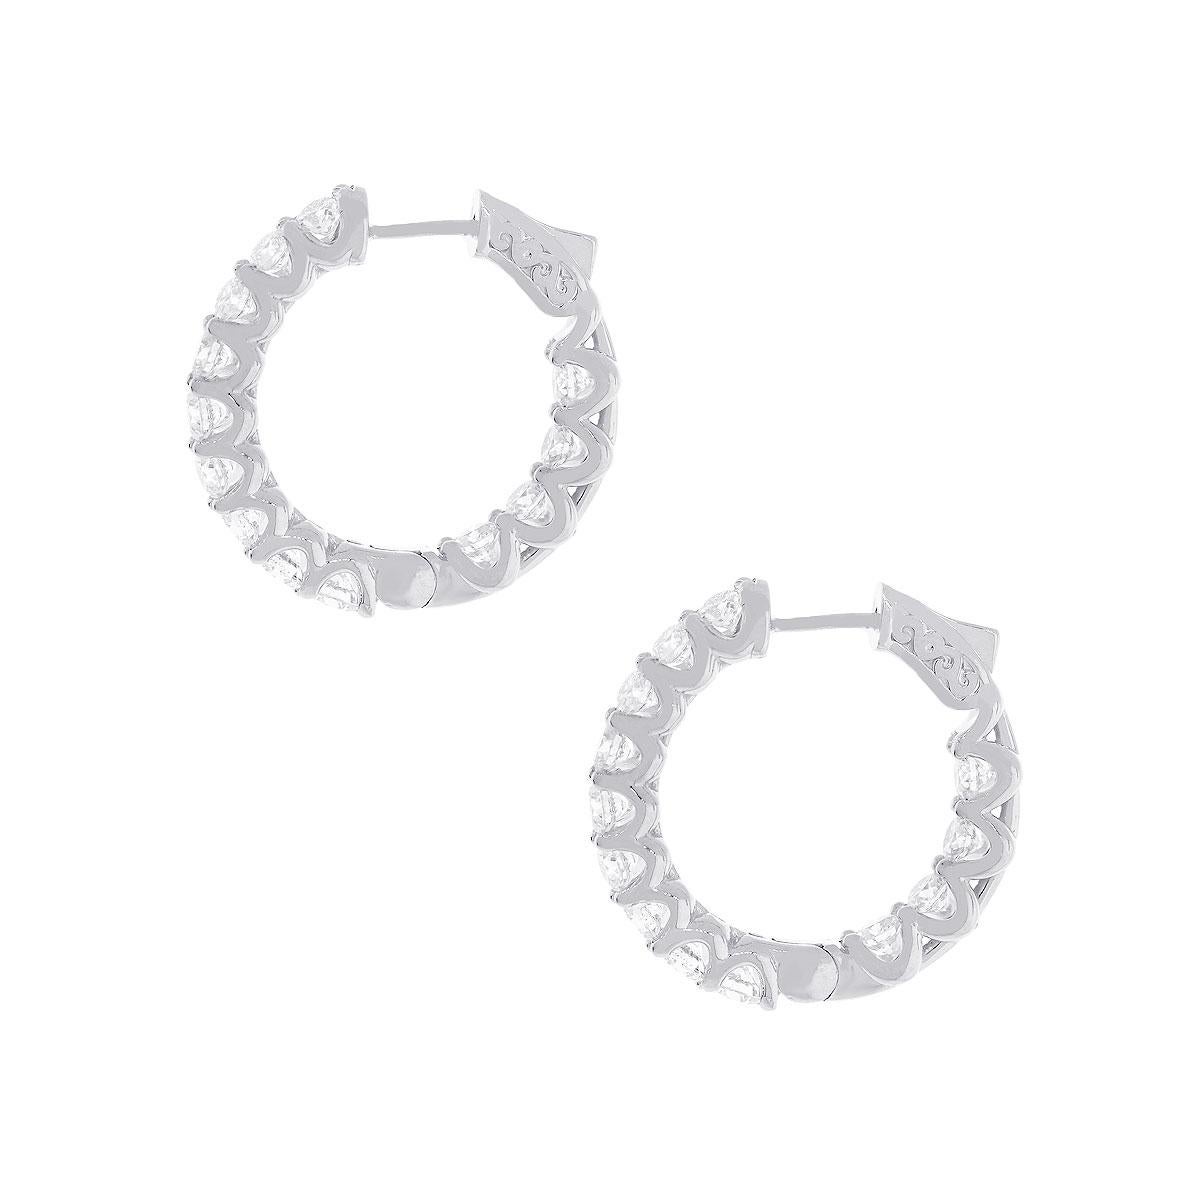 Material: 14k White gold
Style: Diamond inside out hoop earrings
Diamond Details: 26 Stones, approximately 4.29ctw of round brilliant diamonds. Diamonds are G/H in color and VS in clarity.
Earring Measurements: 1″ x 0.20″ x 1.10″
Total Weight: 12.3g